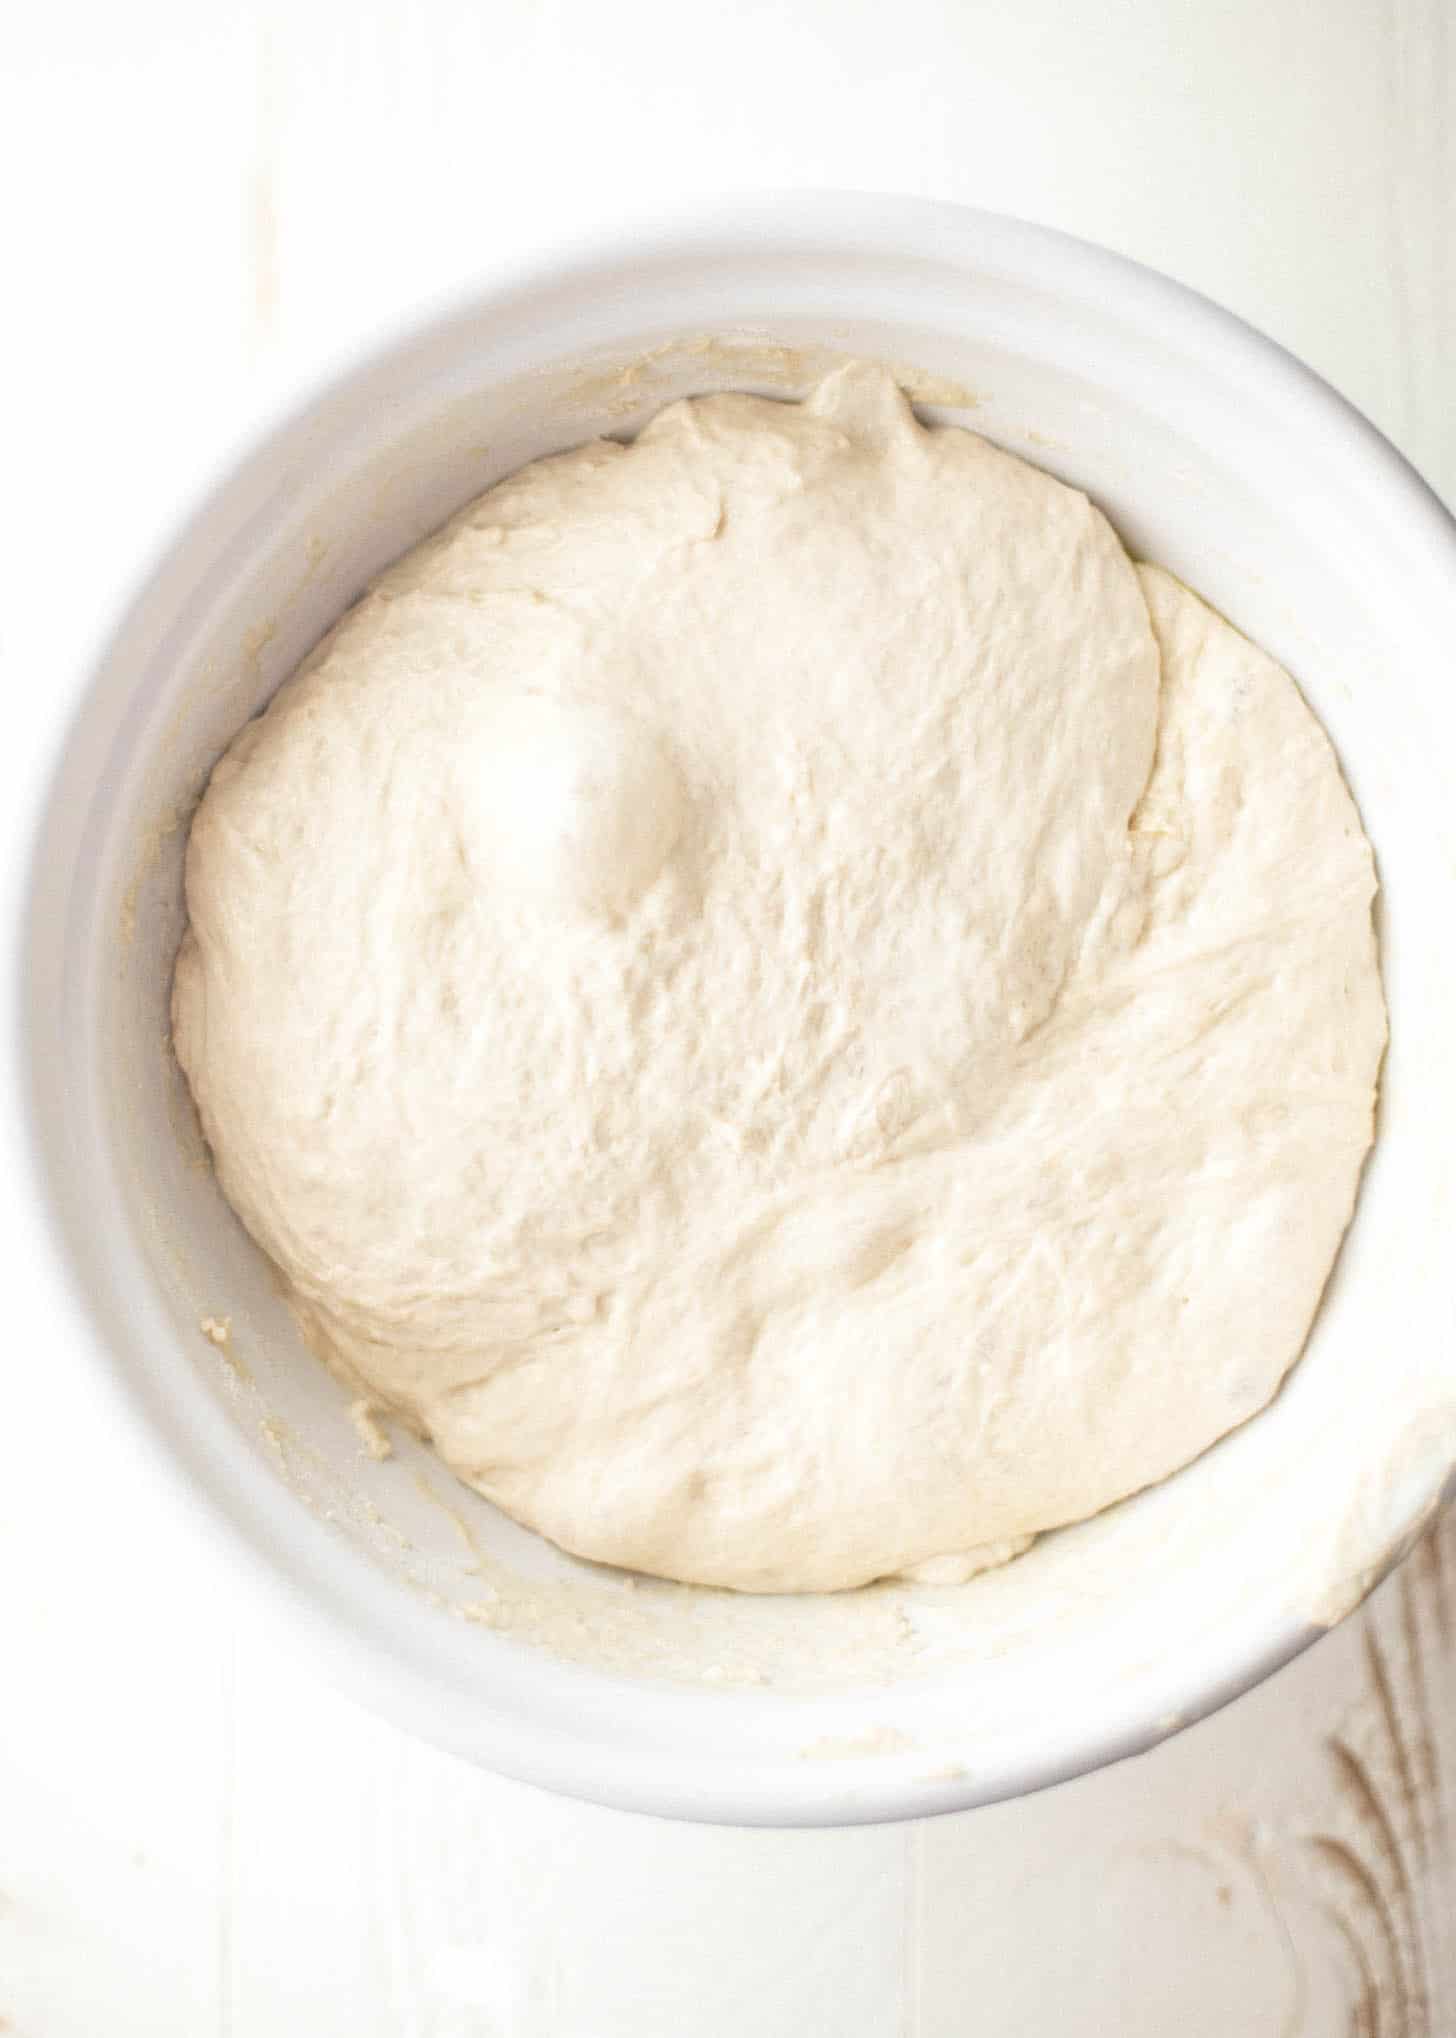 pizza dough in a white bowl after rising